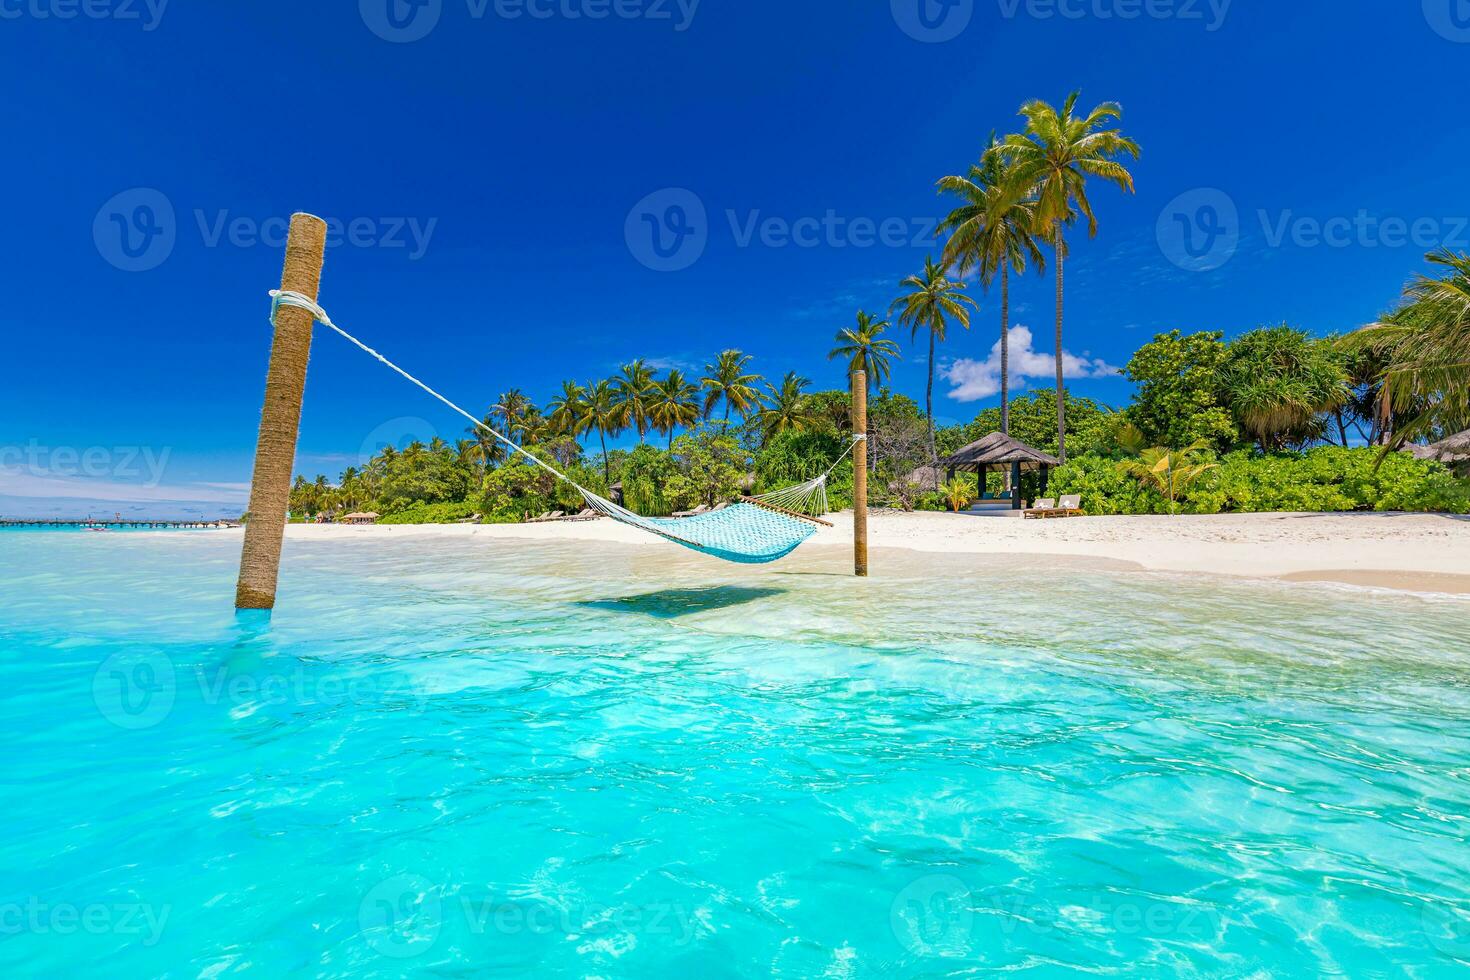 Tropical beach background as summer landscape with beach swing or hammock and white sand and calm sea for beach banner. Perfect beach scene vacation and summer holiday concept. Nature landscape photo